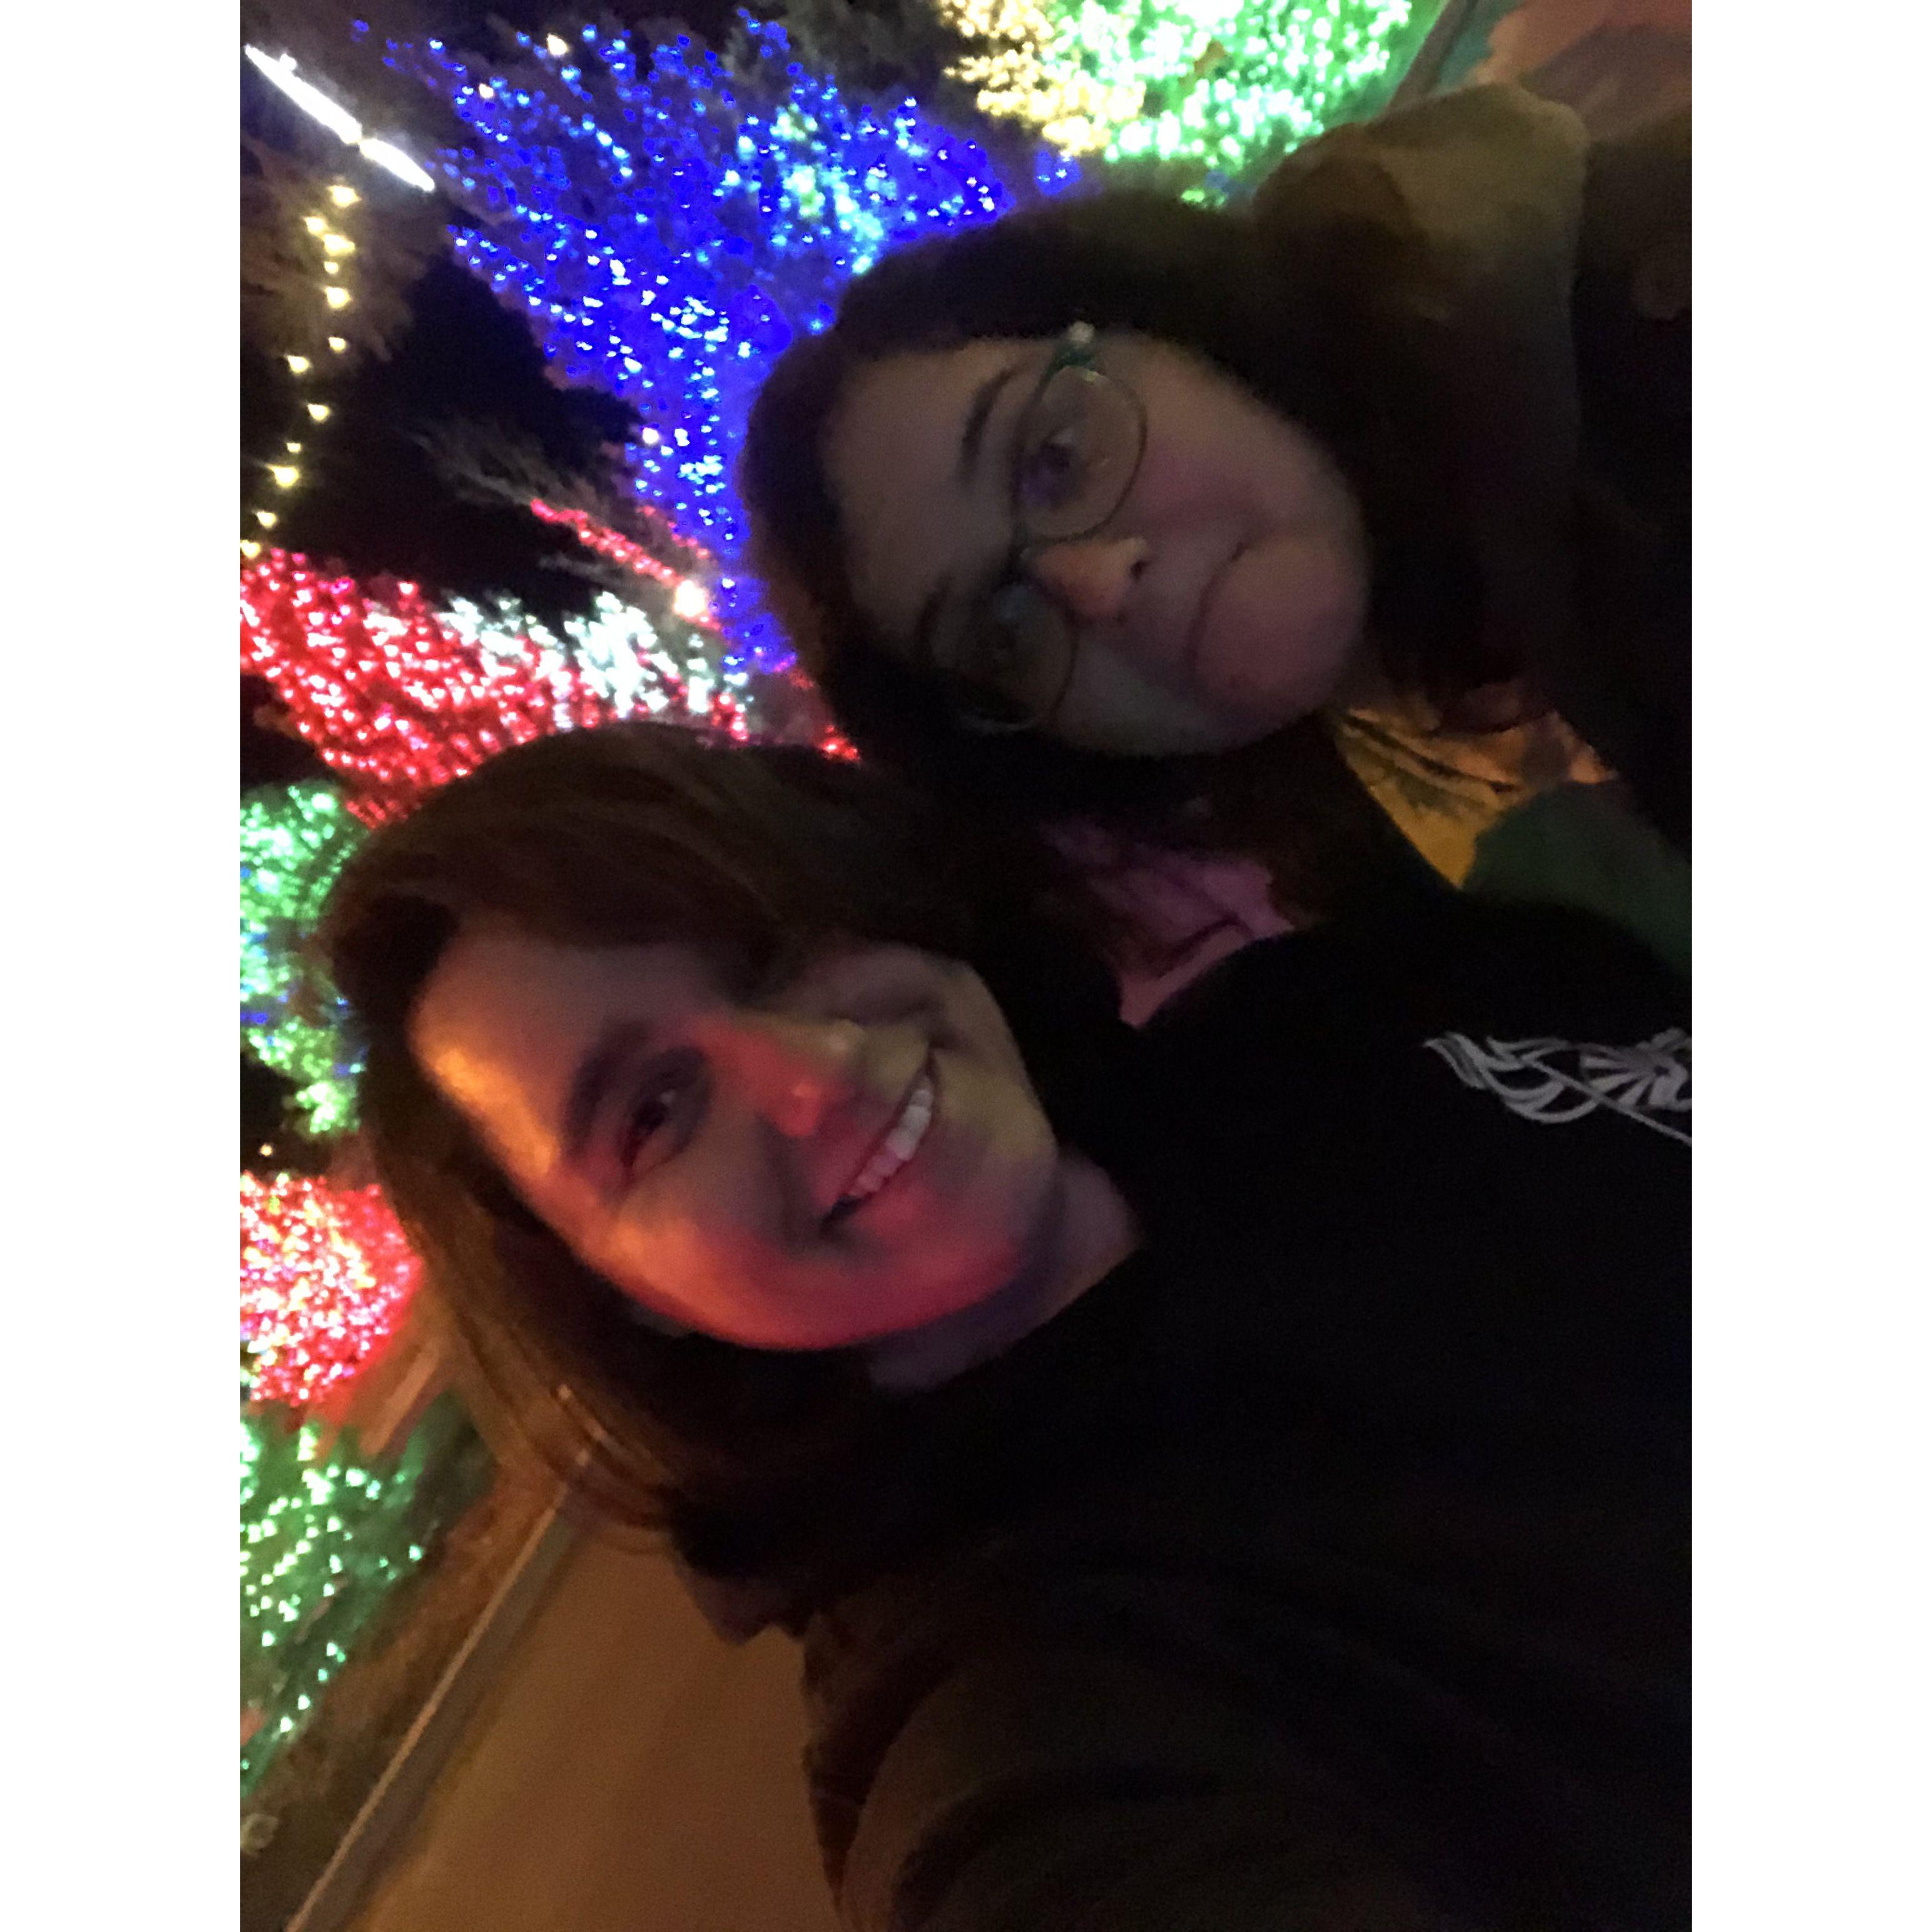 November 2020 - Surprise birthday gift to see the lights and snow